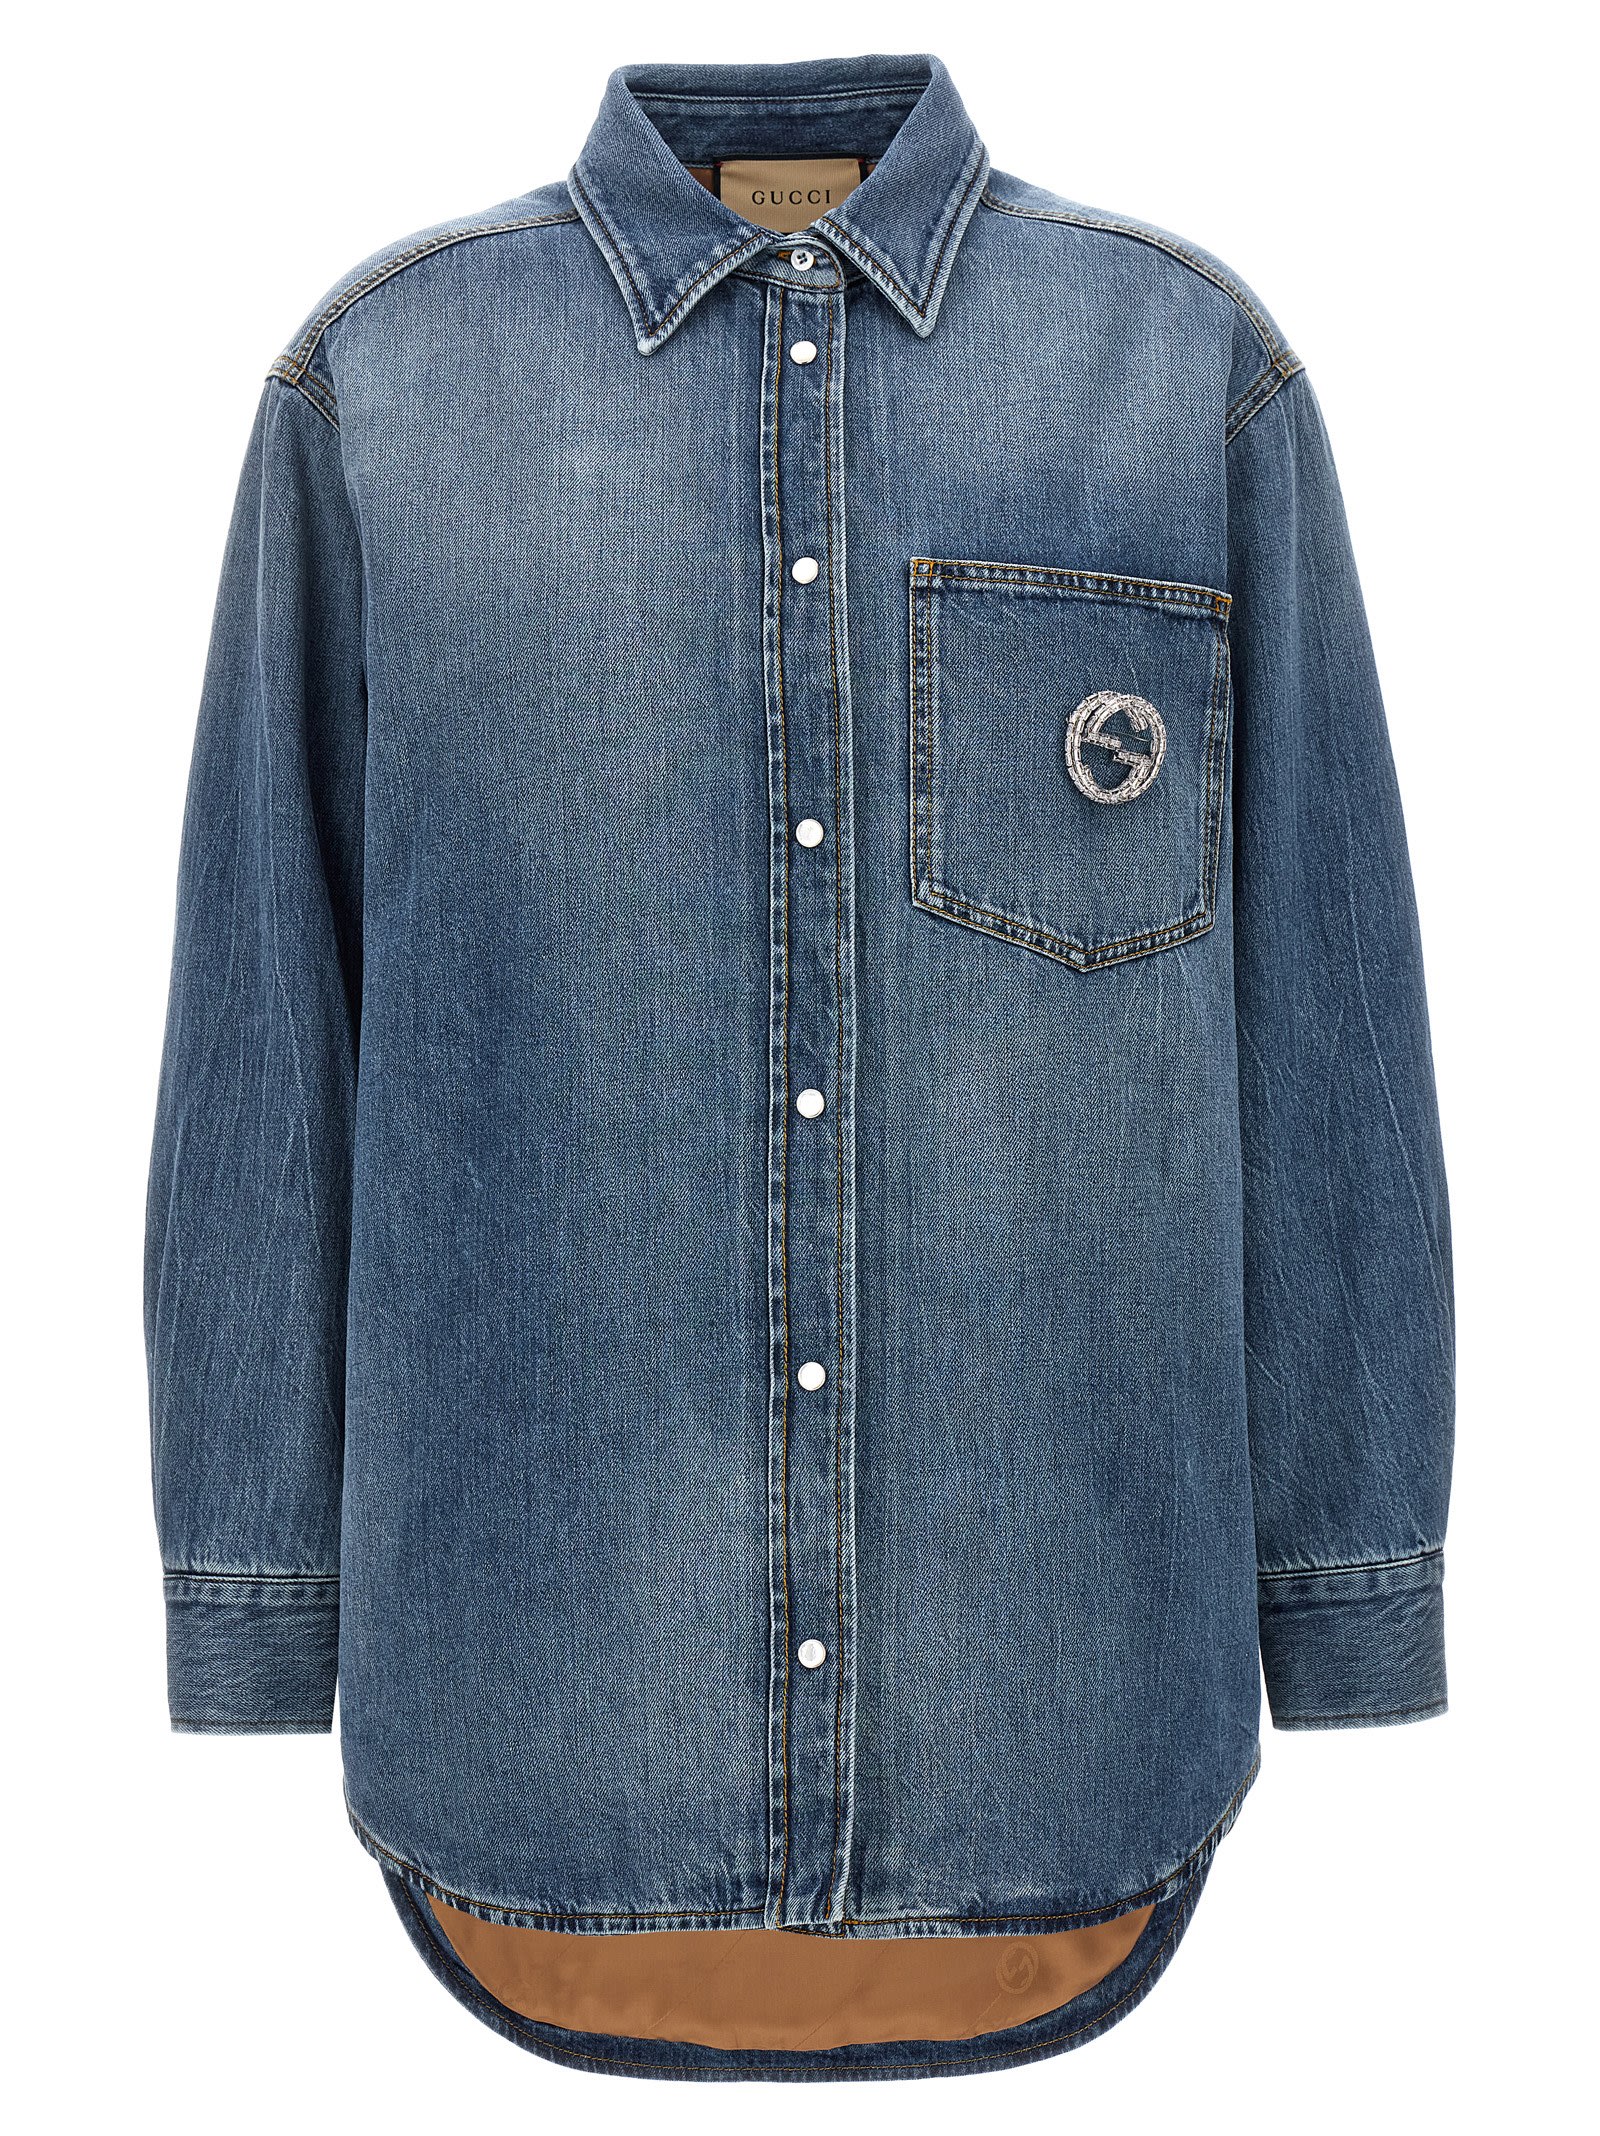 GUCCI QUILTED INNER DENIM SHIRT